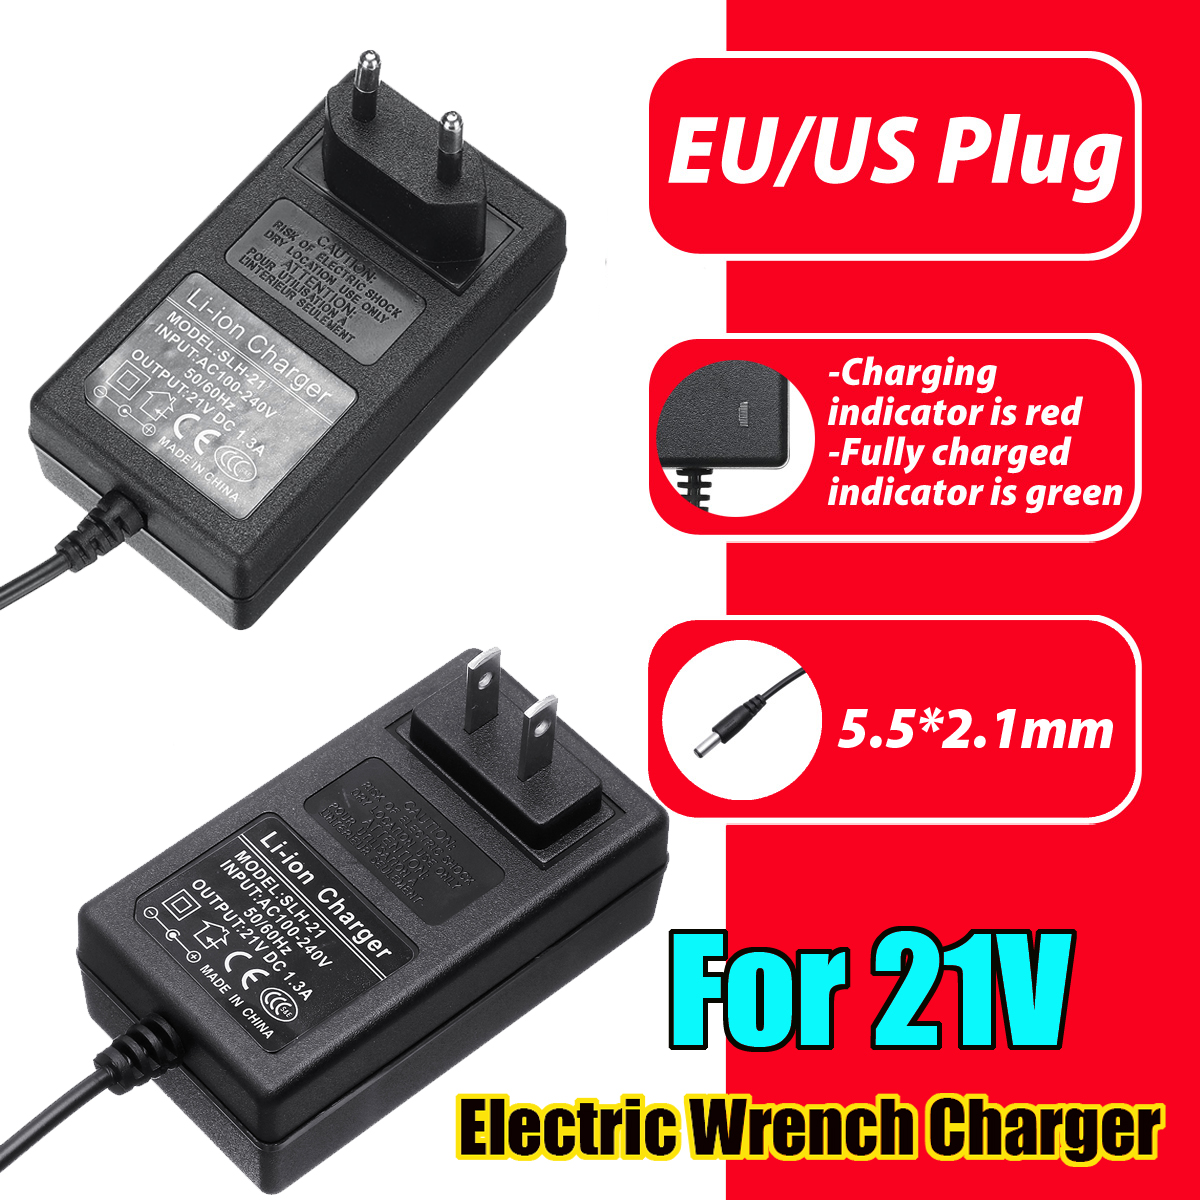 21V-13A-Charger-Adapter-for-Lithium-Li-ion-LiPo-Battery-Packs-Electric-Wrench-1437230-2